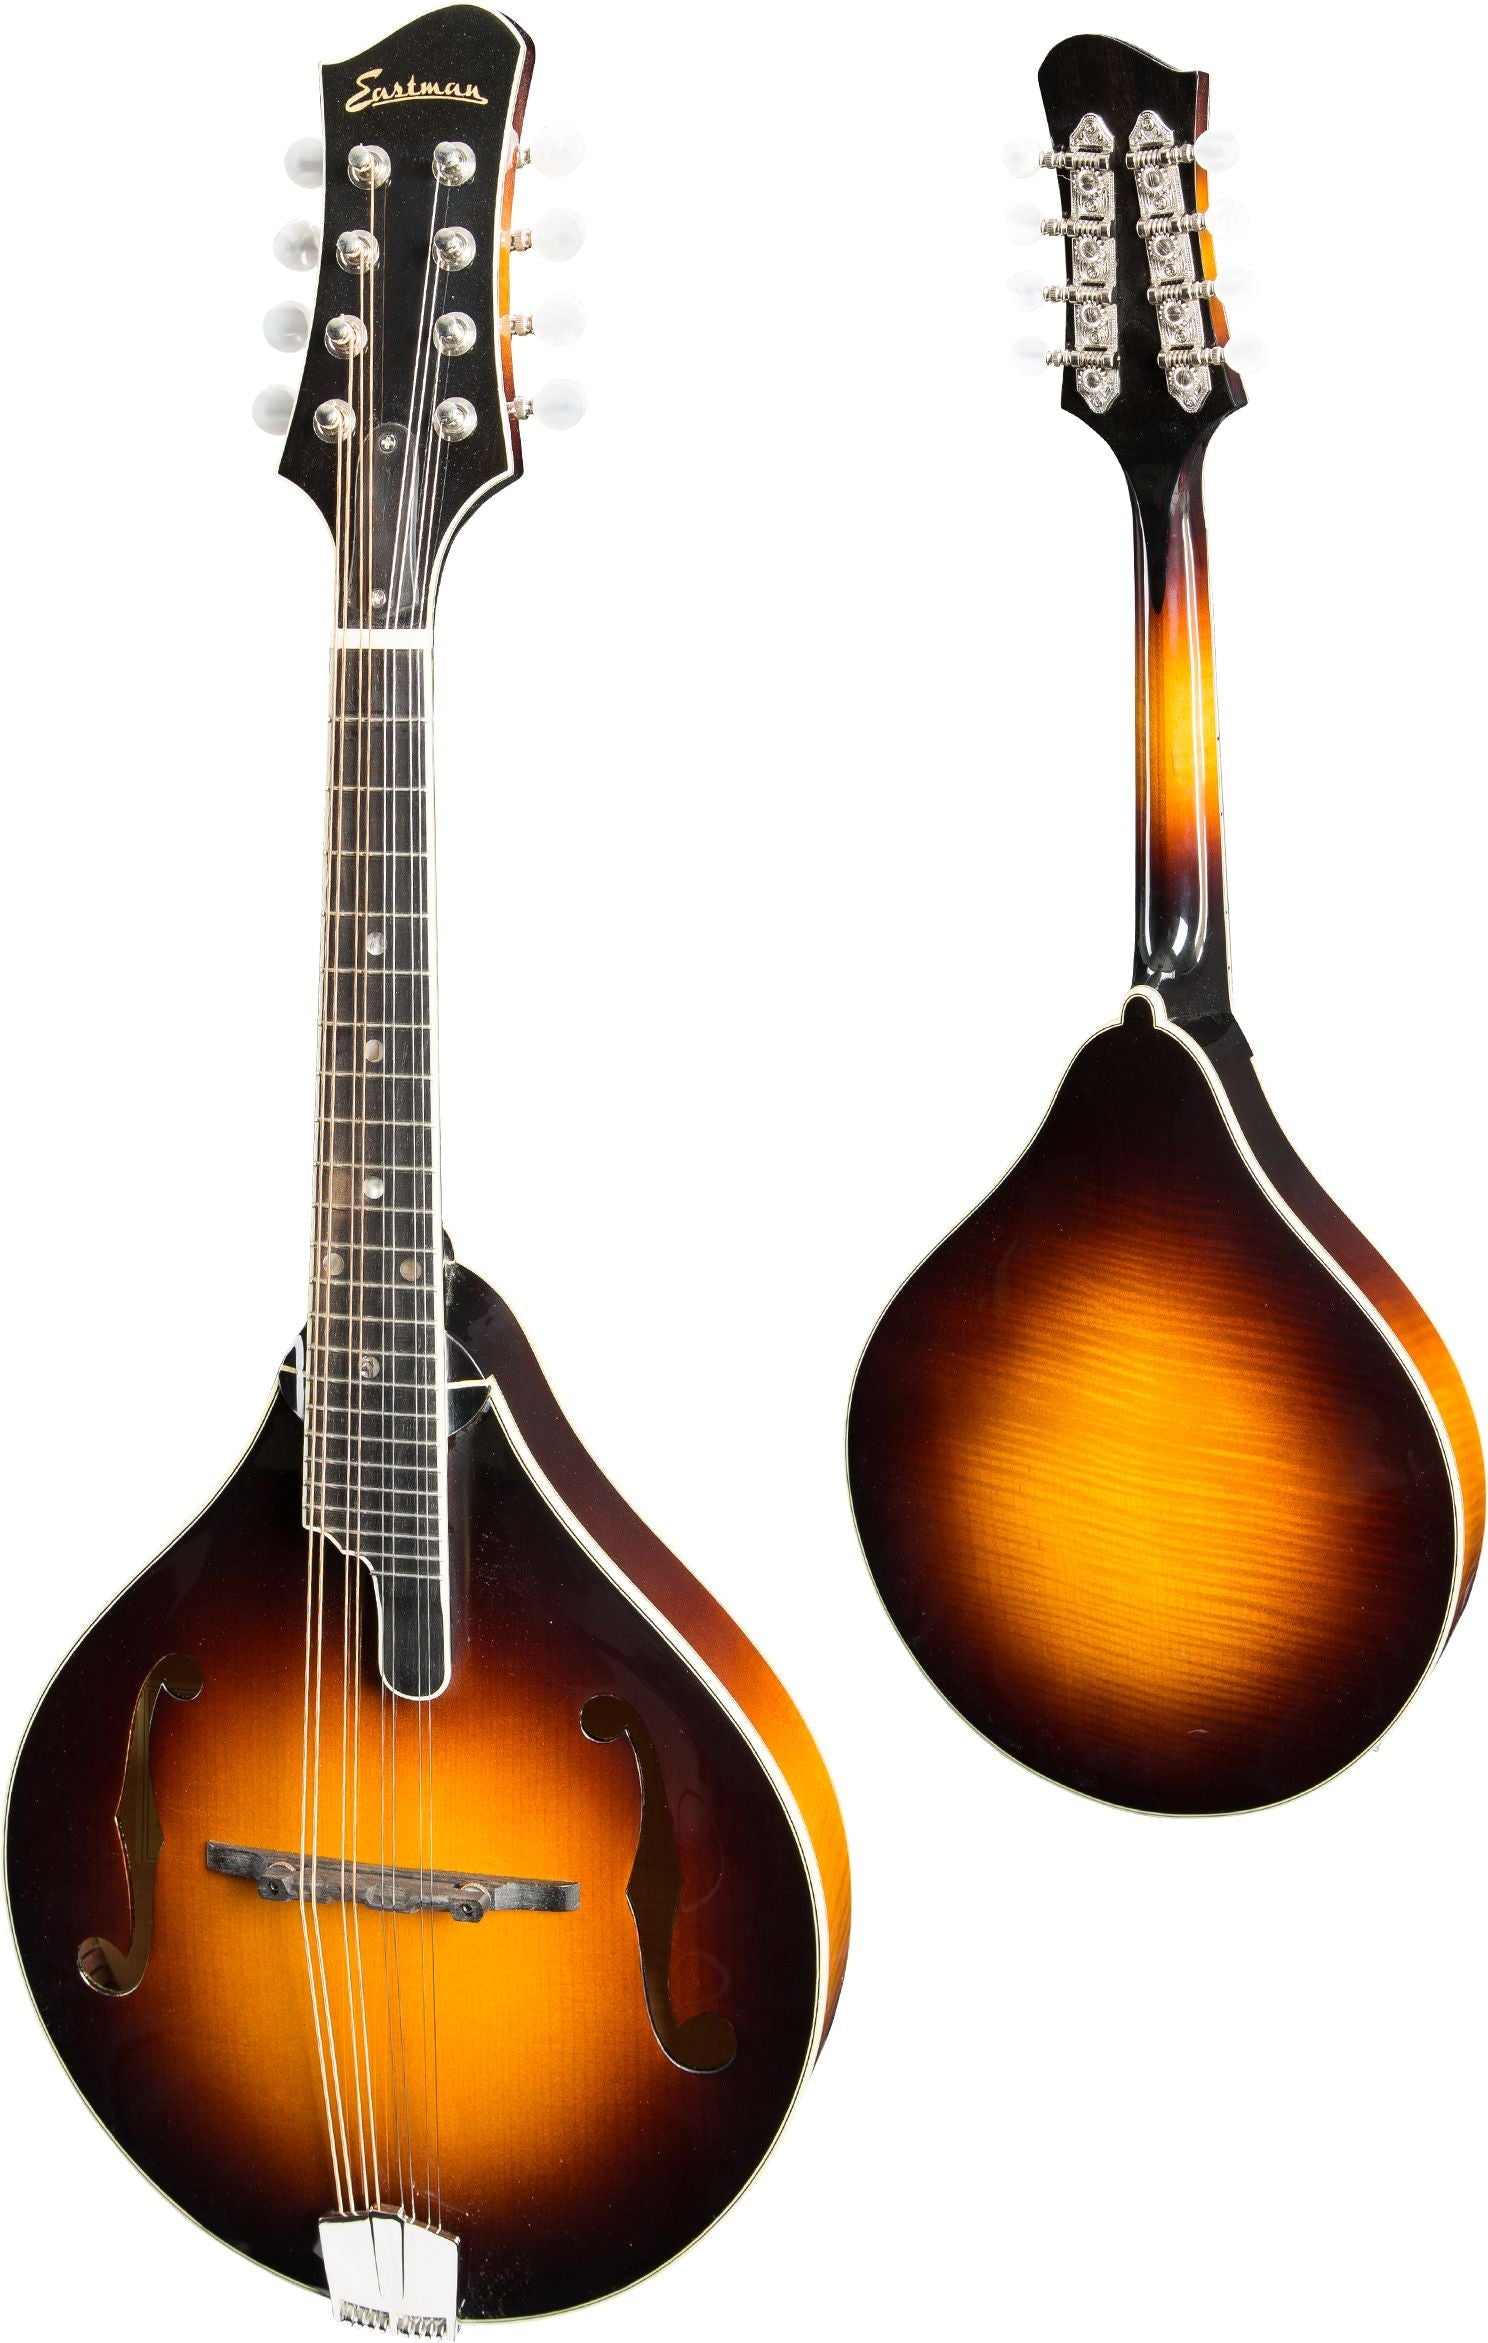 Eastman MD805 A-style F-holes Mandolin Sunburst (Solid Adirondack spruce top, Solid AAA Maple back and sides, w/Case), Mandolin for sale at Richards Guitars.